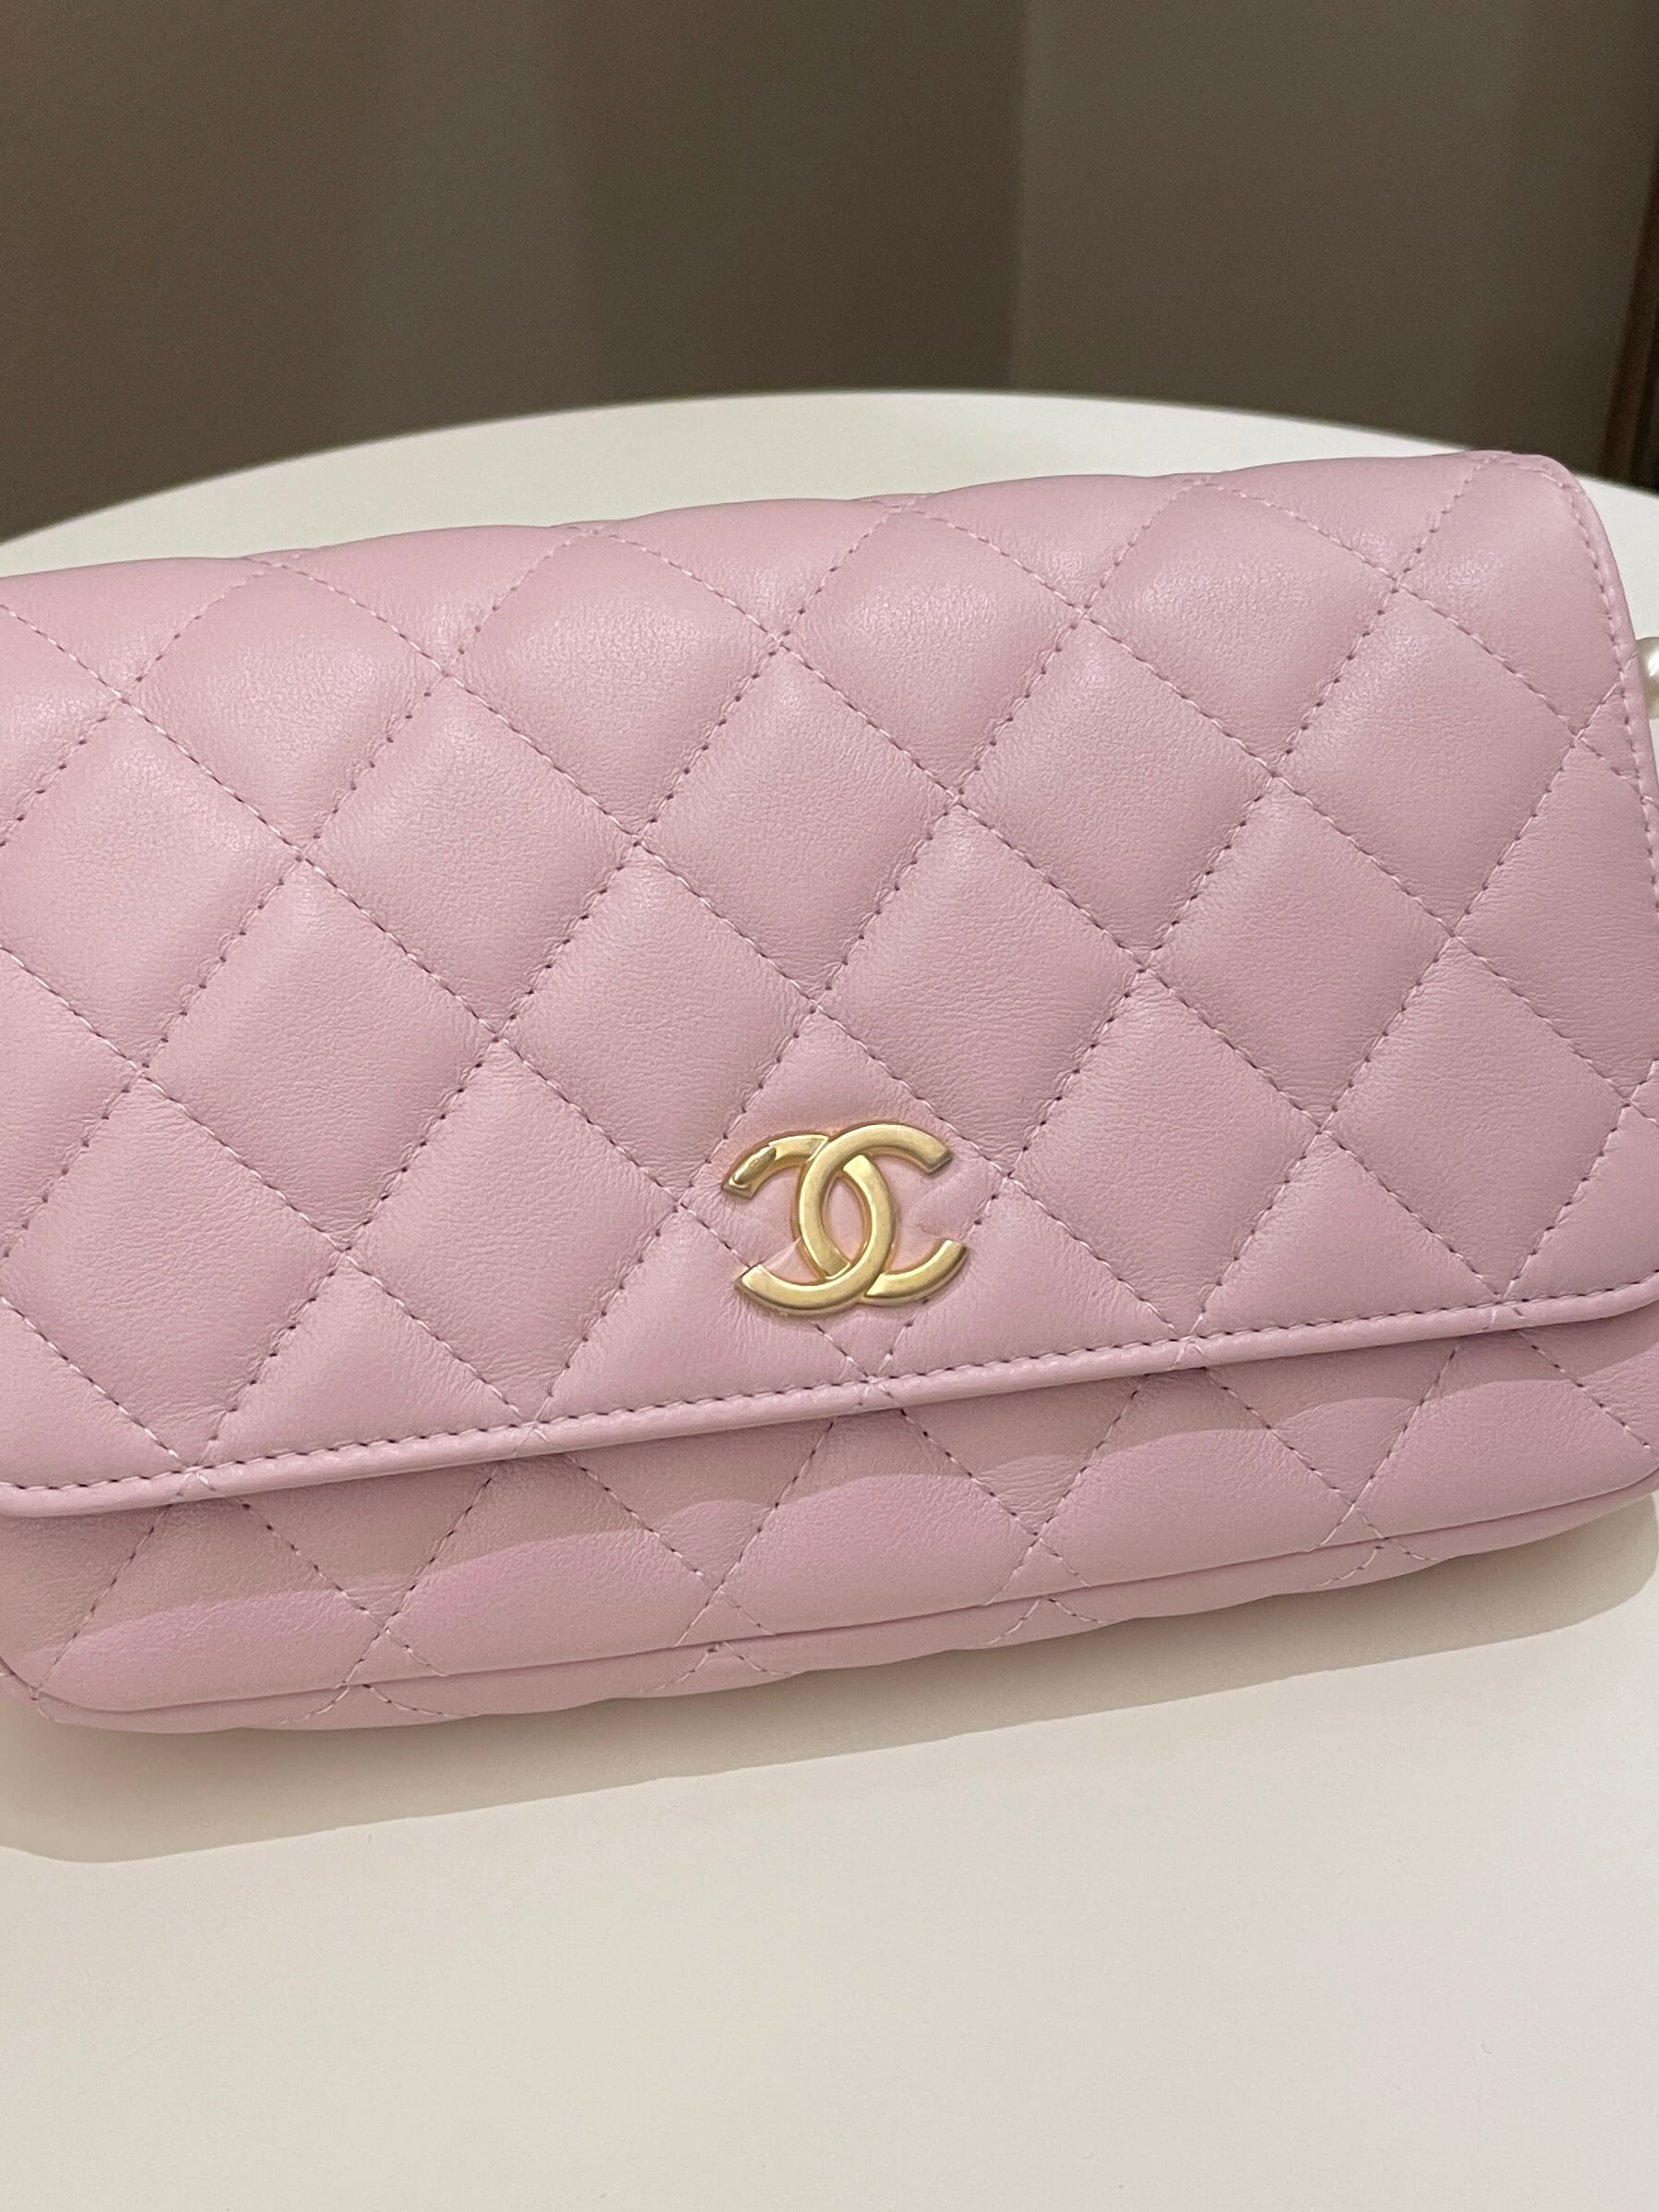 Very Pretty! NWT 🌸 CHANEL Classic 22C Pink 🌸Wallet On Chain WOC Flap Bag  GHW